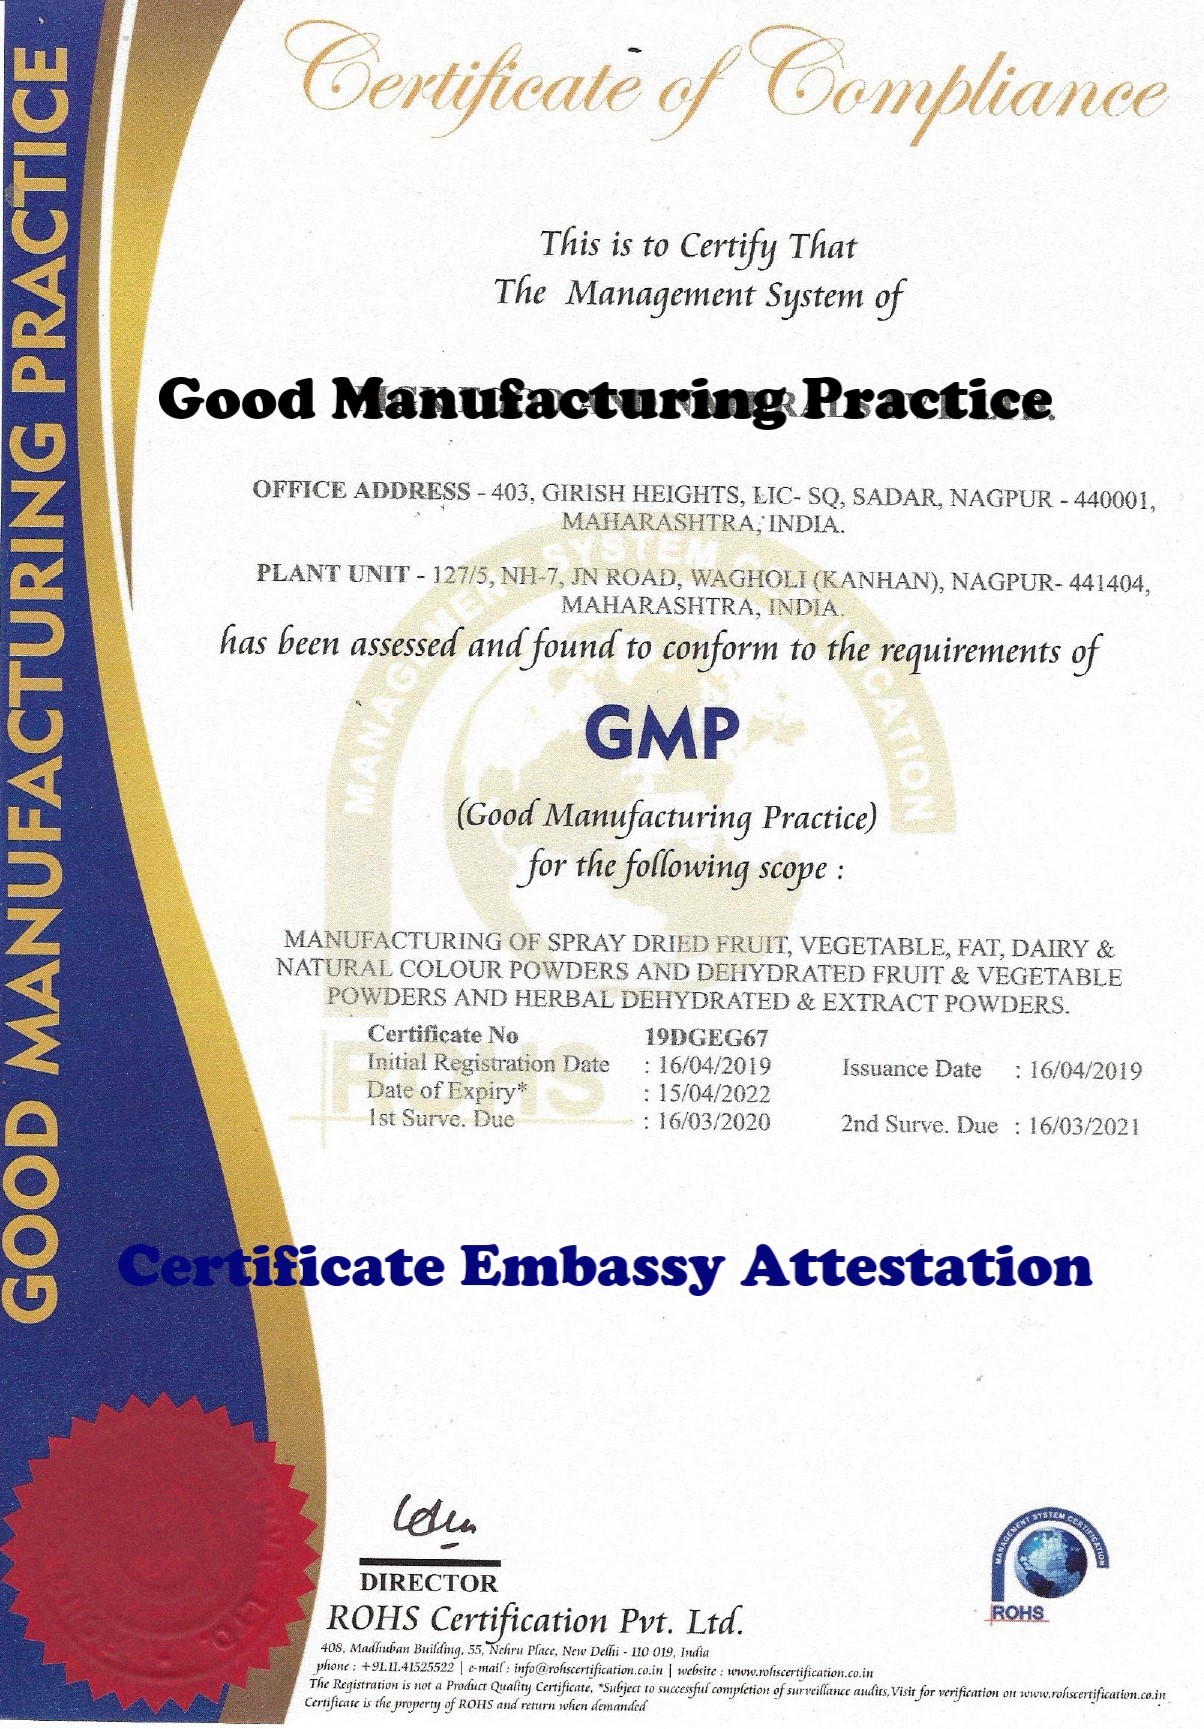 GMP Certificate Attestation from Austrian Empire Embassy